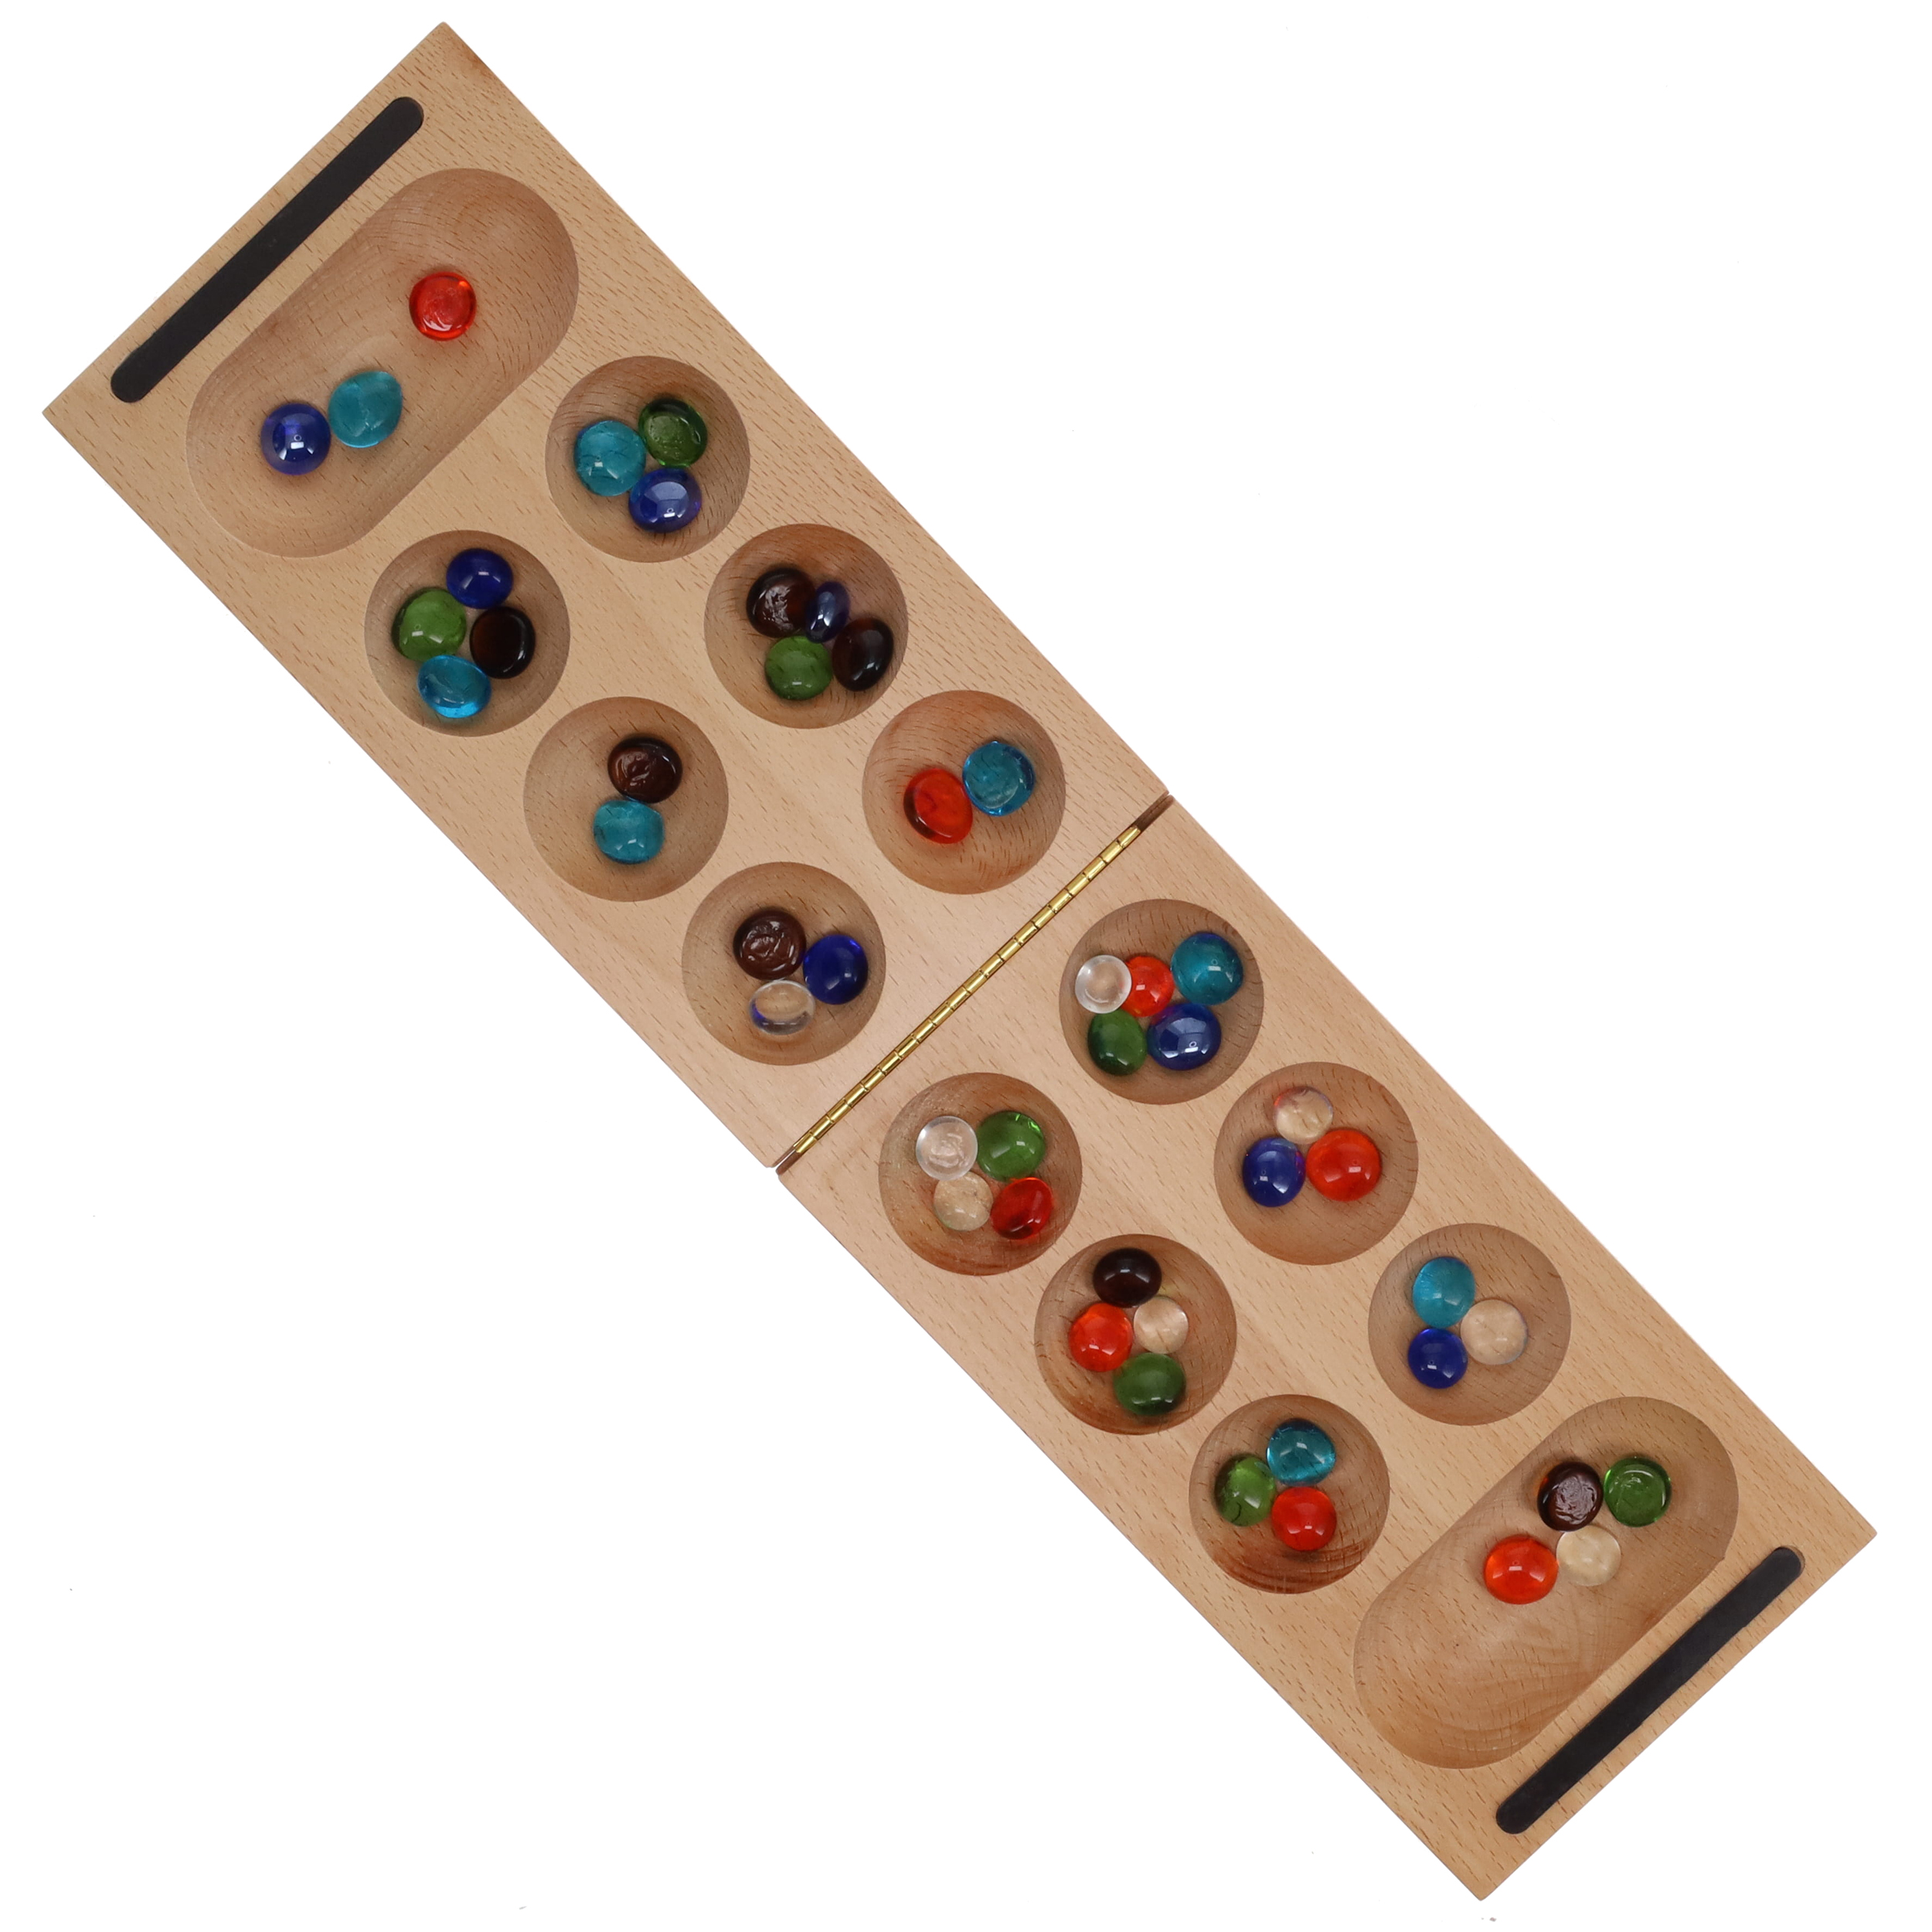 Classic Folding Mancala Board Game with Glass Beads/Stones. Family